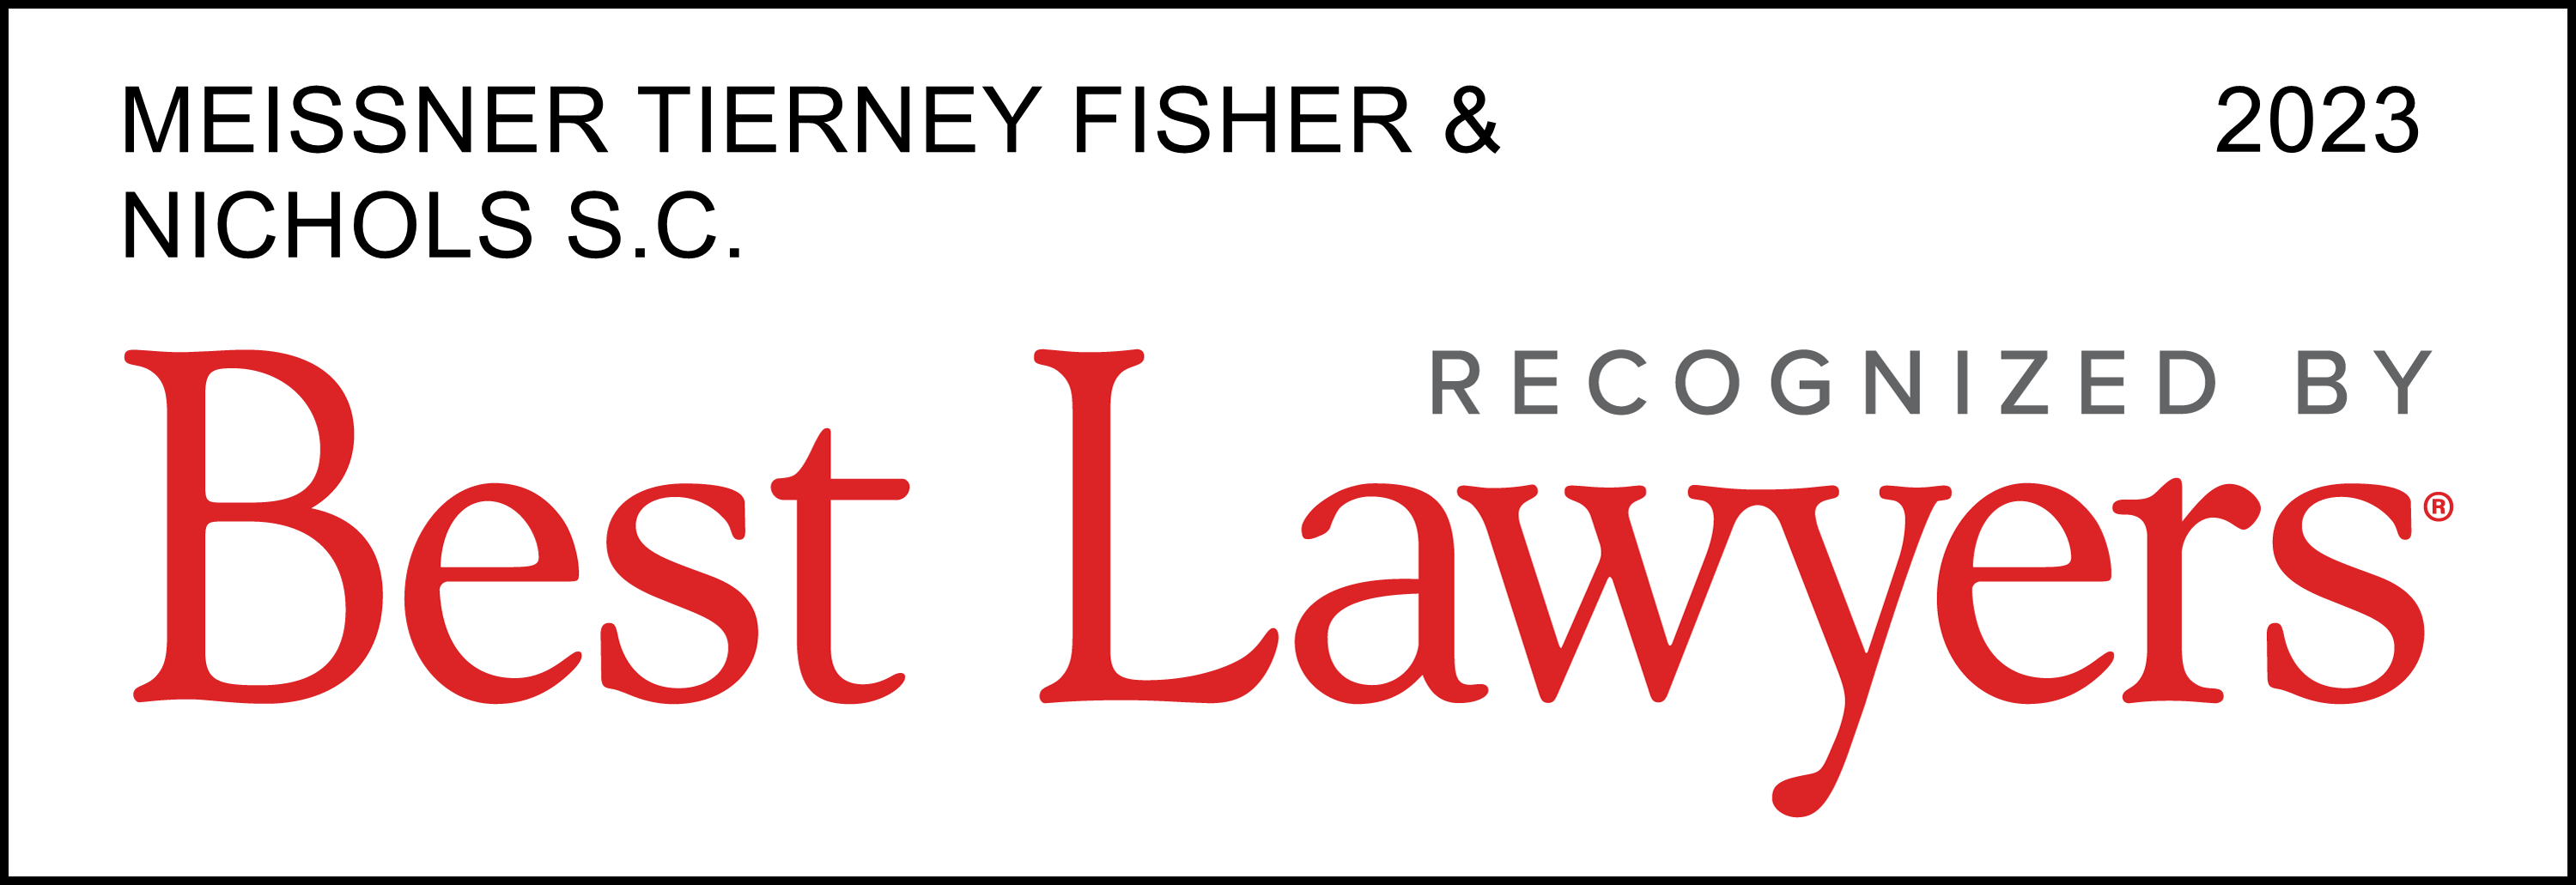 Recognized by Best Lawyers